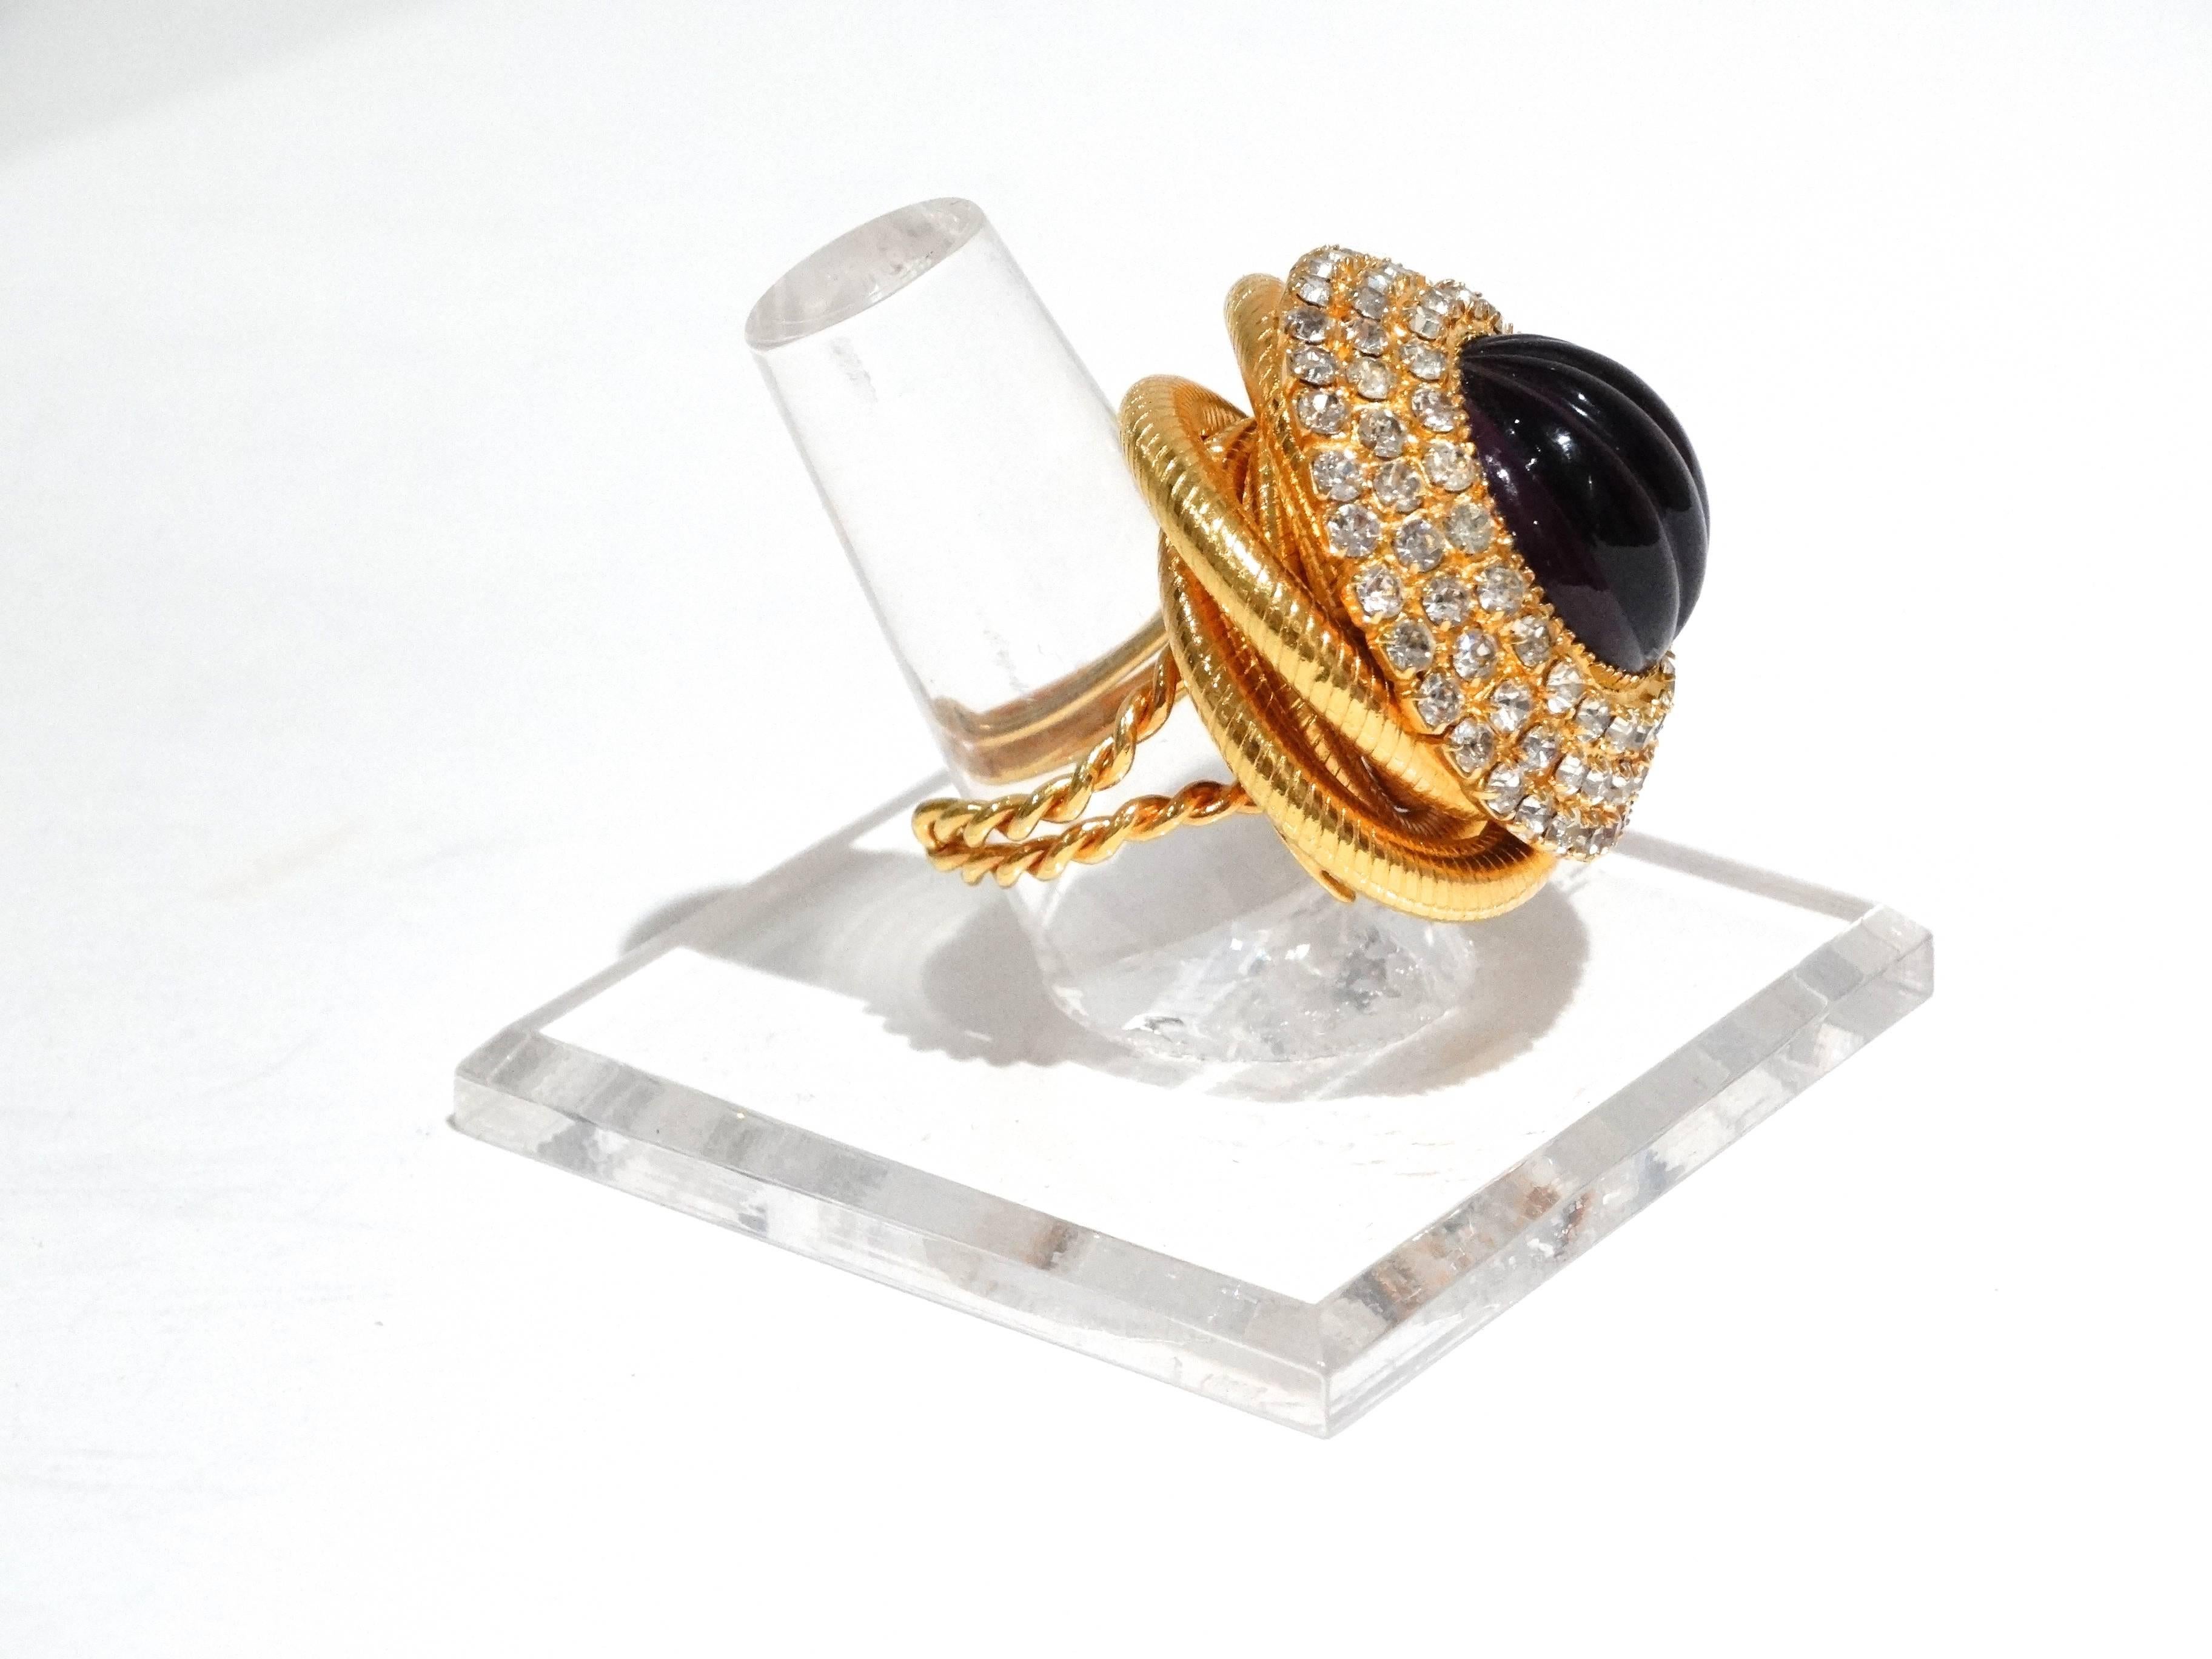 A true red carpet center piece! All hand done, the metal work is intricate and elaborate, with a 3 rows of rhinestones throughout, glass purple cabochon stone is deep and rich in color. The gold plating is very heavy. 
This cocktail ring is signed